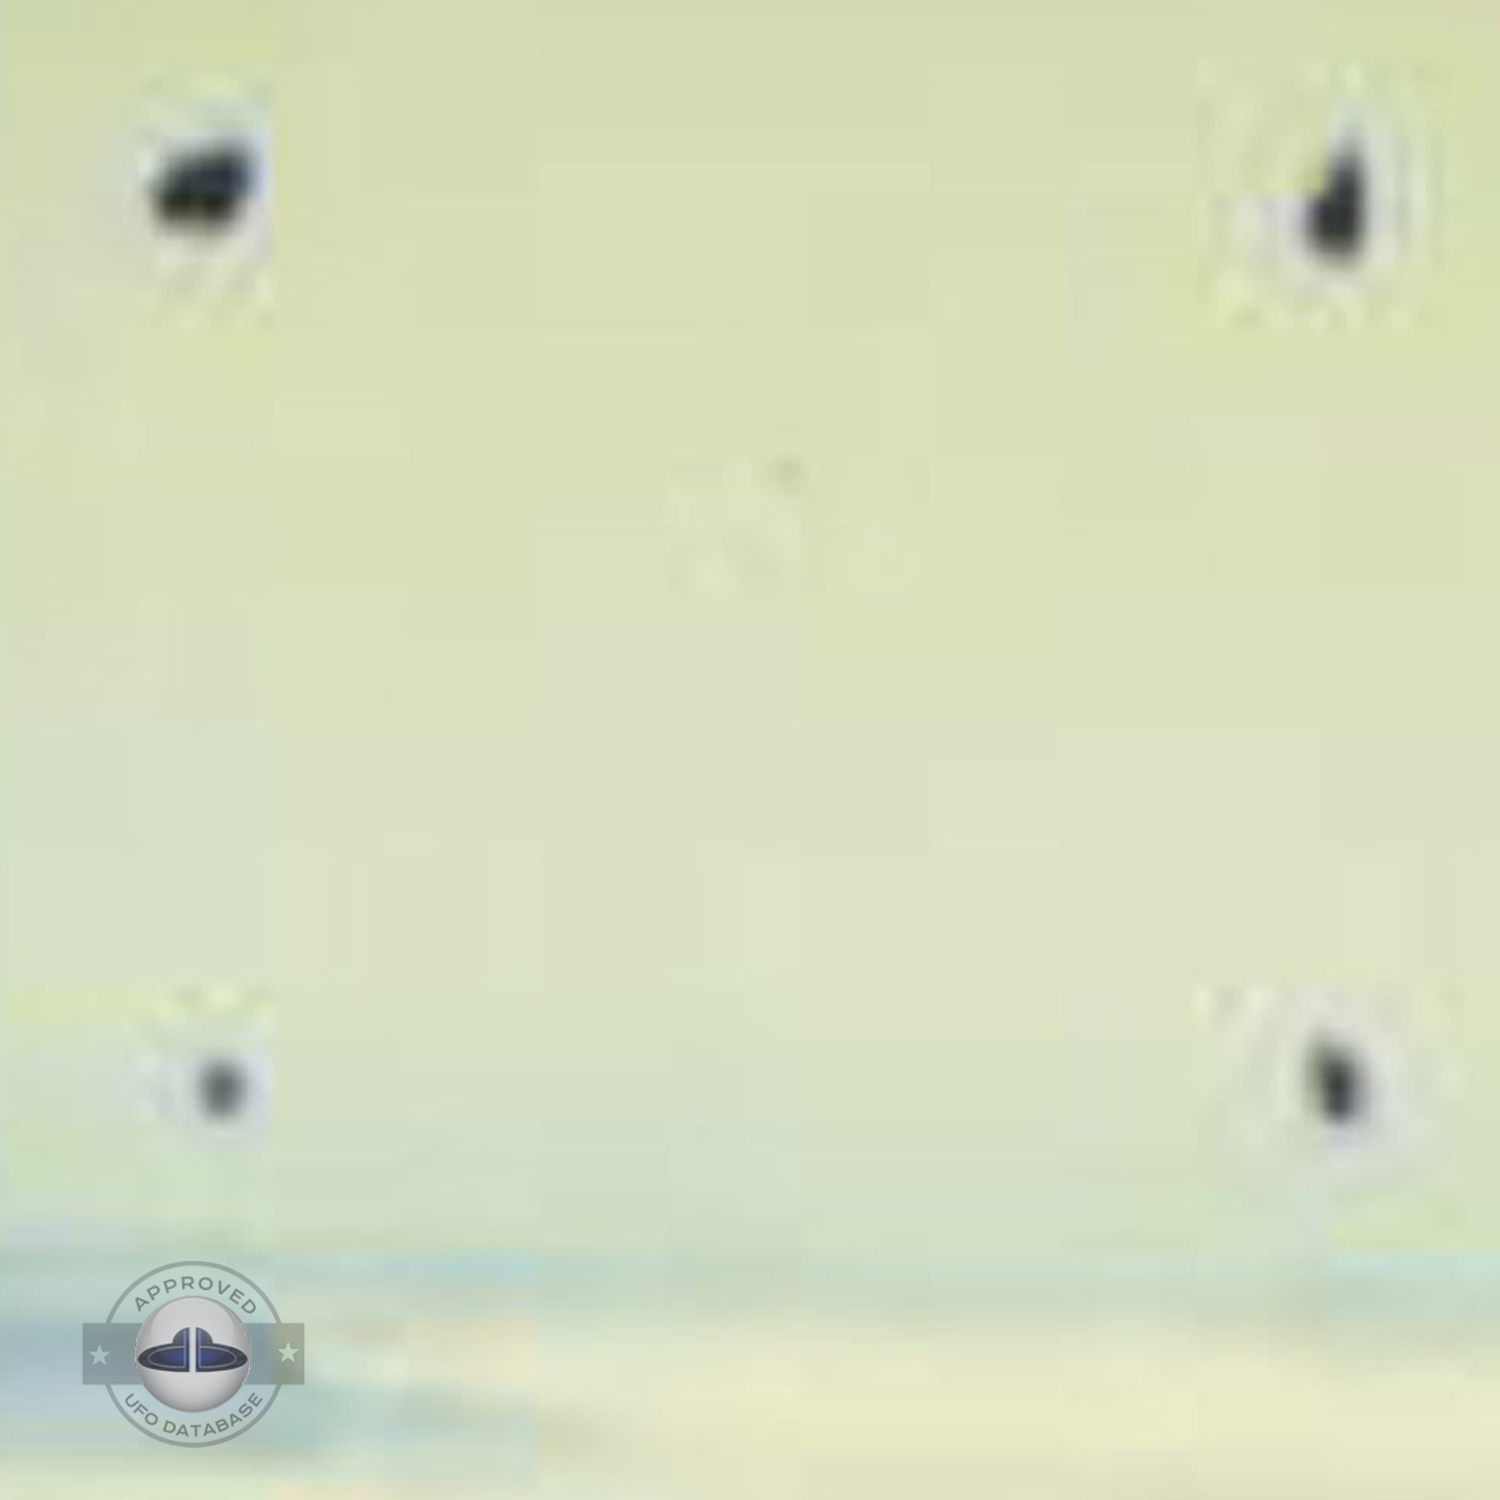 Lake Michigan Sighting of 4 ufos in a square formation - Winter 1985 UFO Picture #92-4